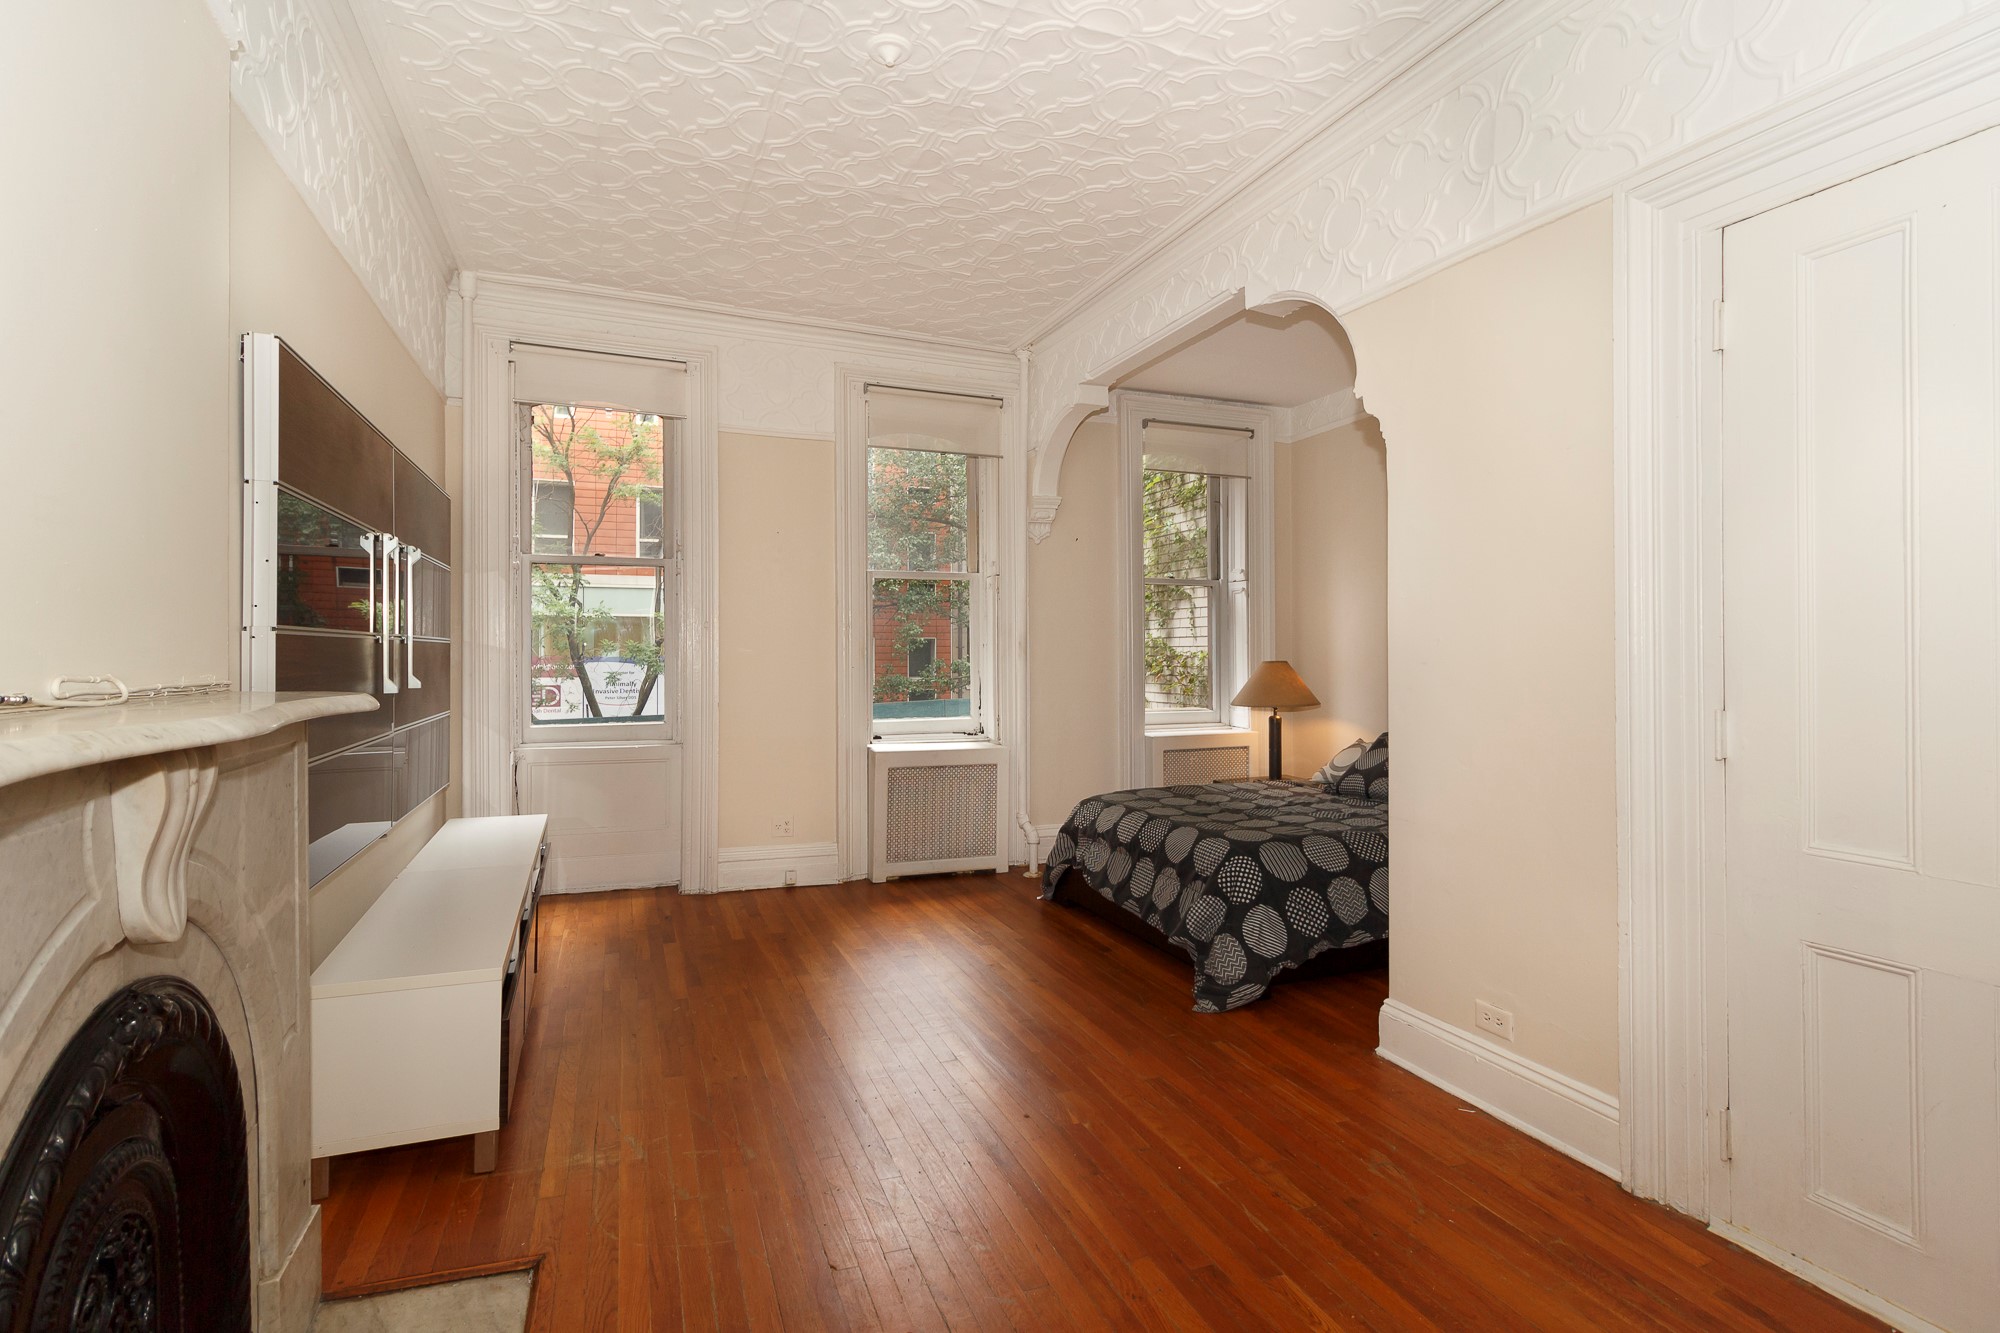 New york ny nyc apartment real estate interior photographer one bedroom midtown east manhattan bedroom